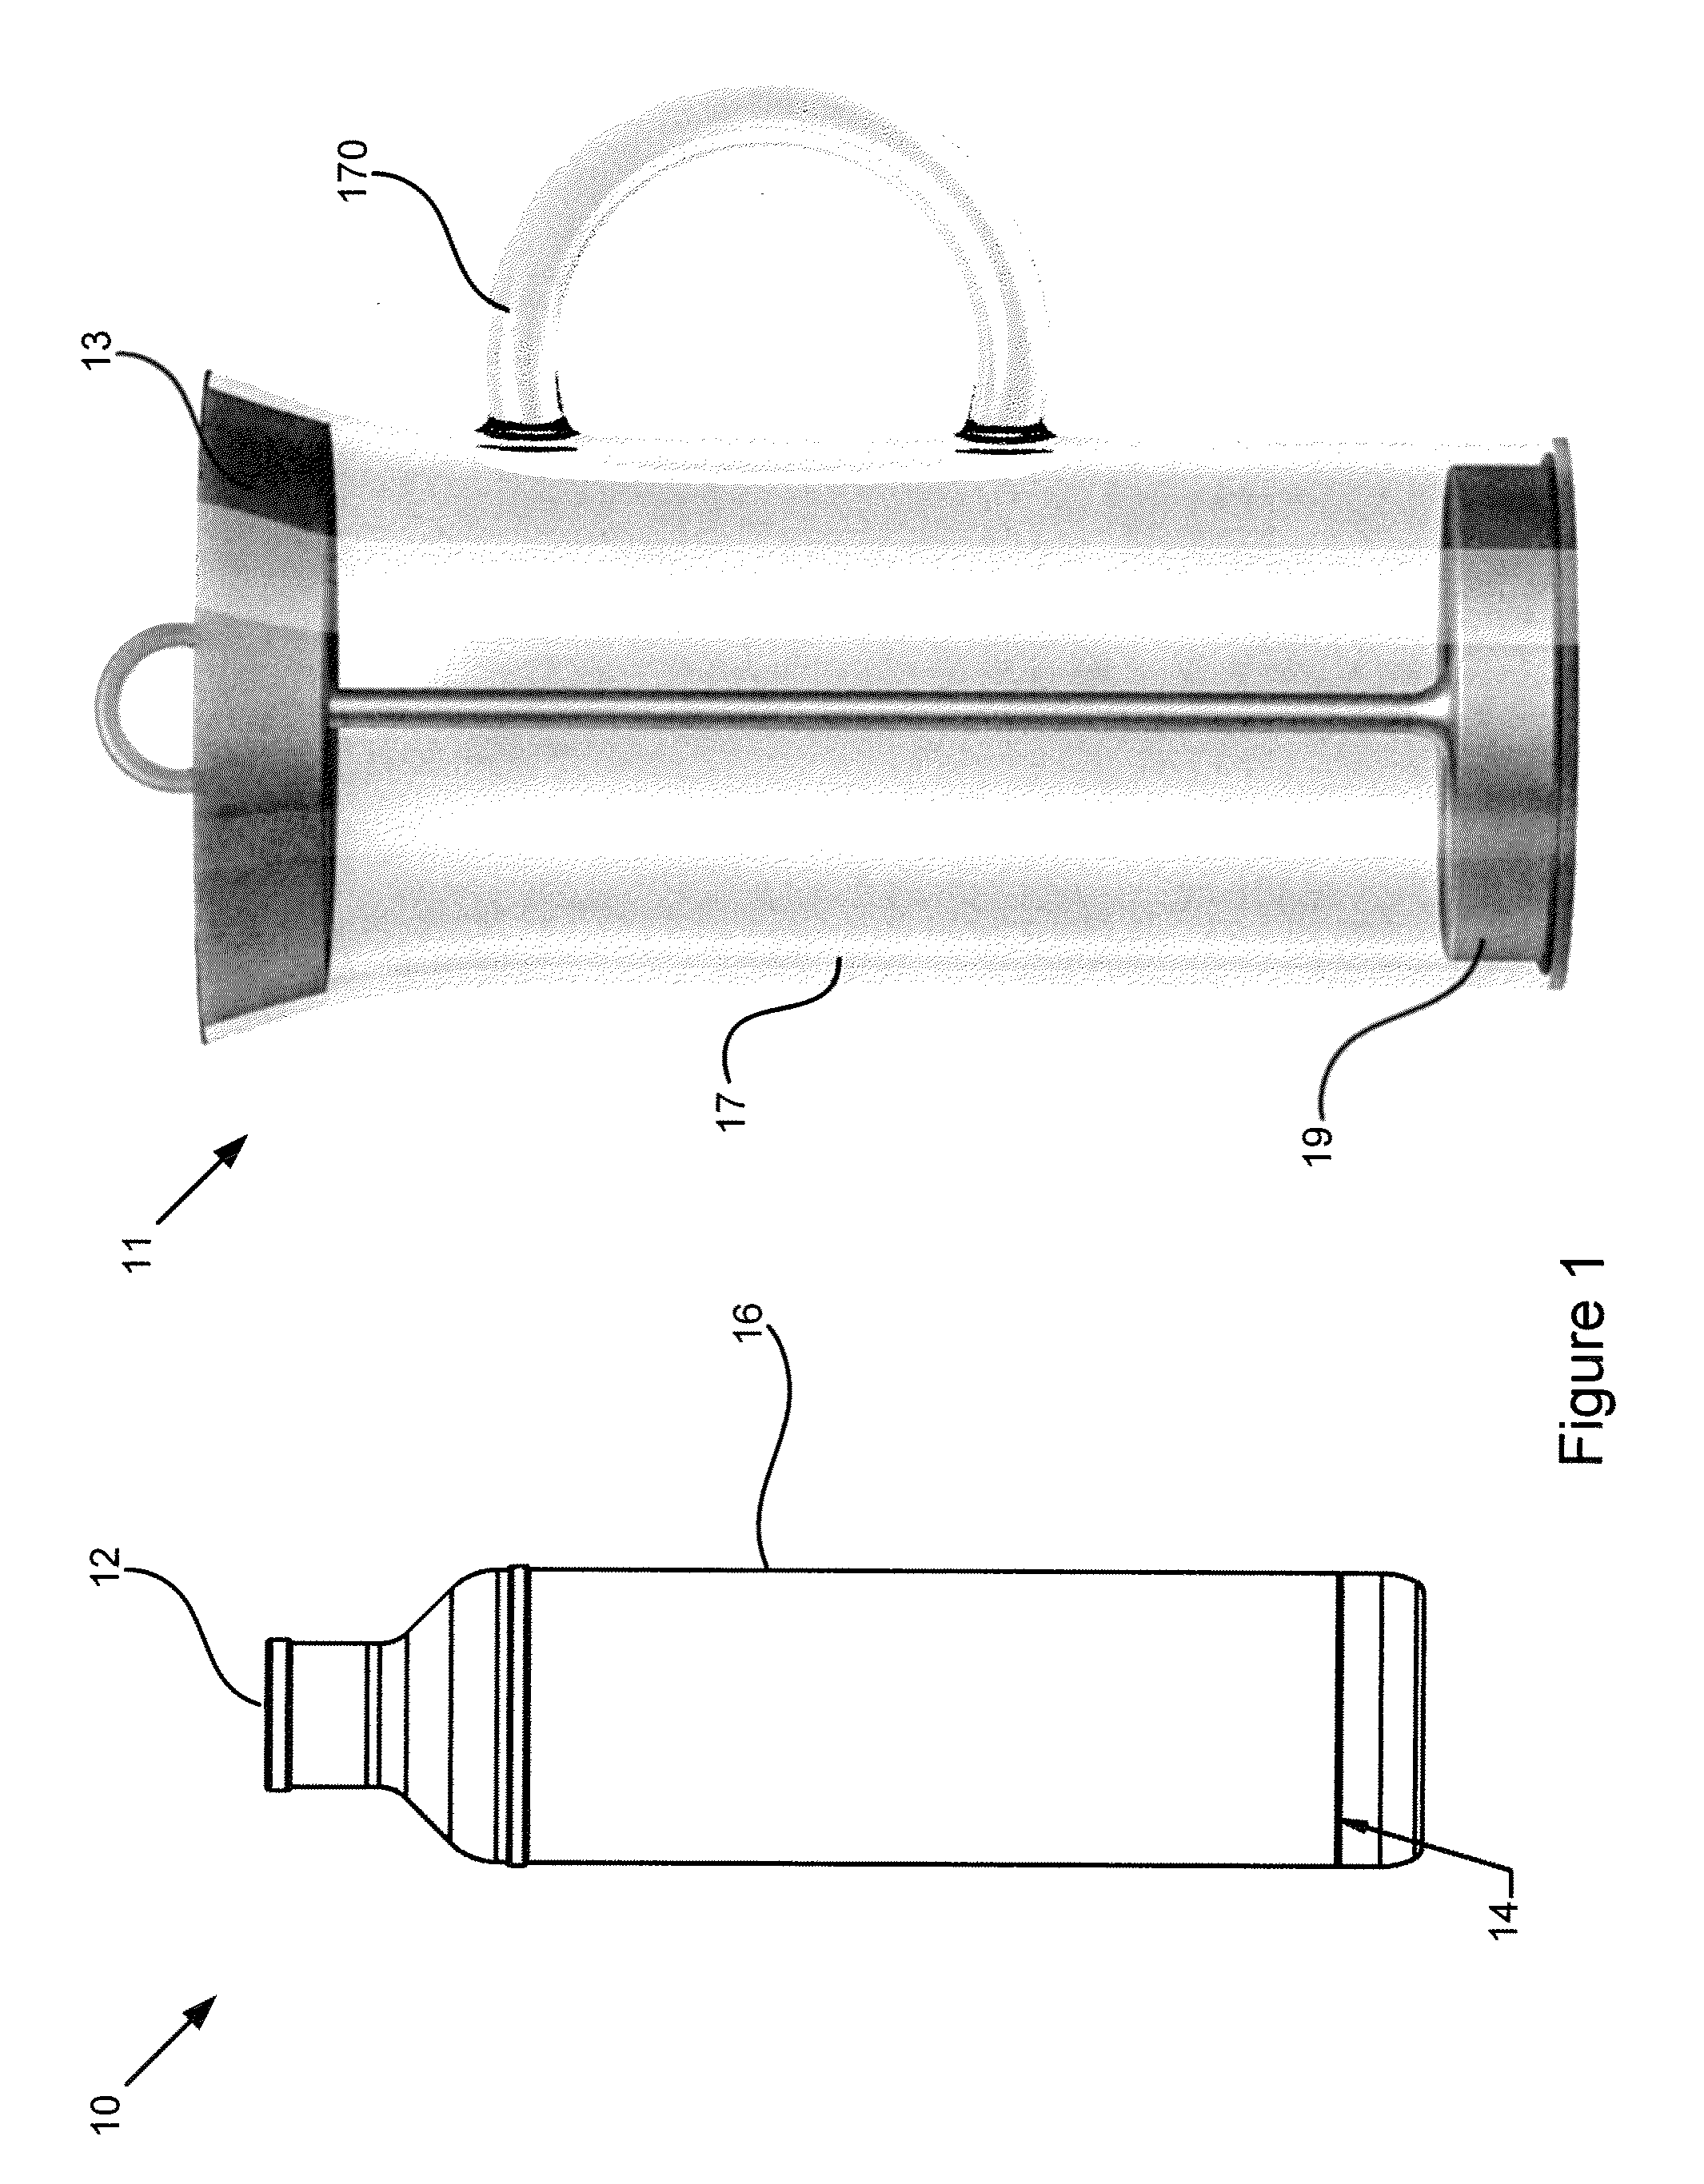 Bottle with an integrated filtration assembly that is manually operated using a plunger